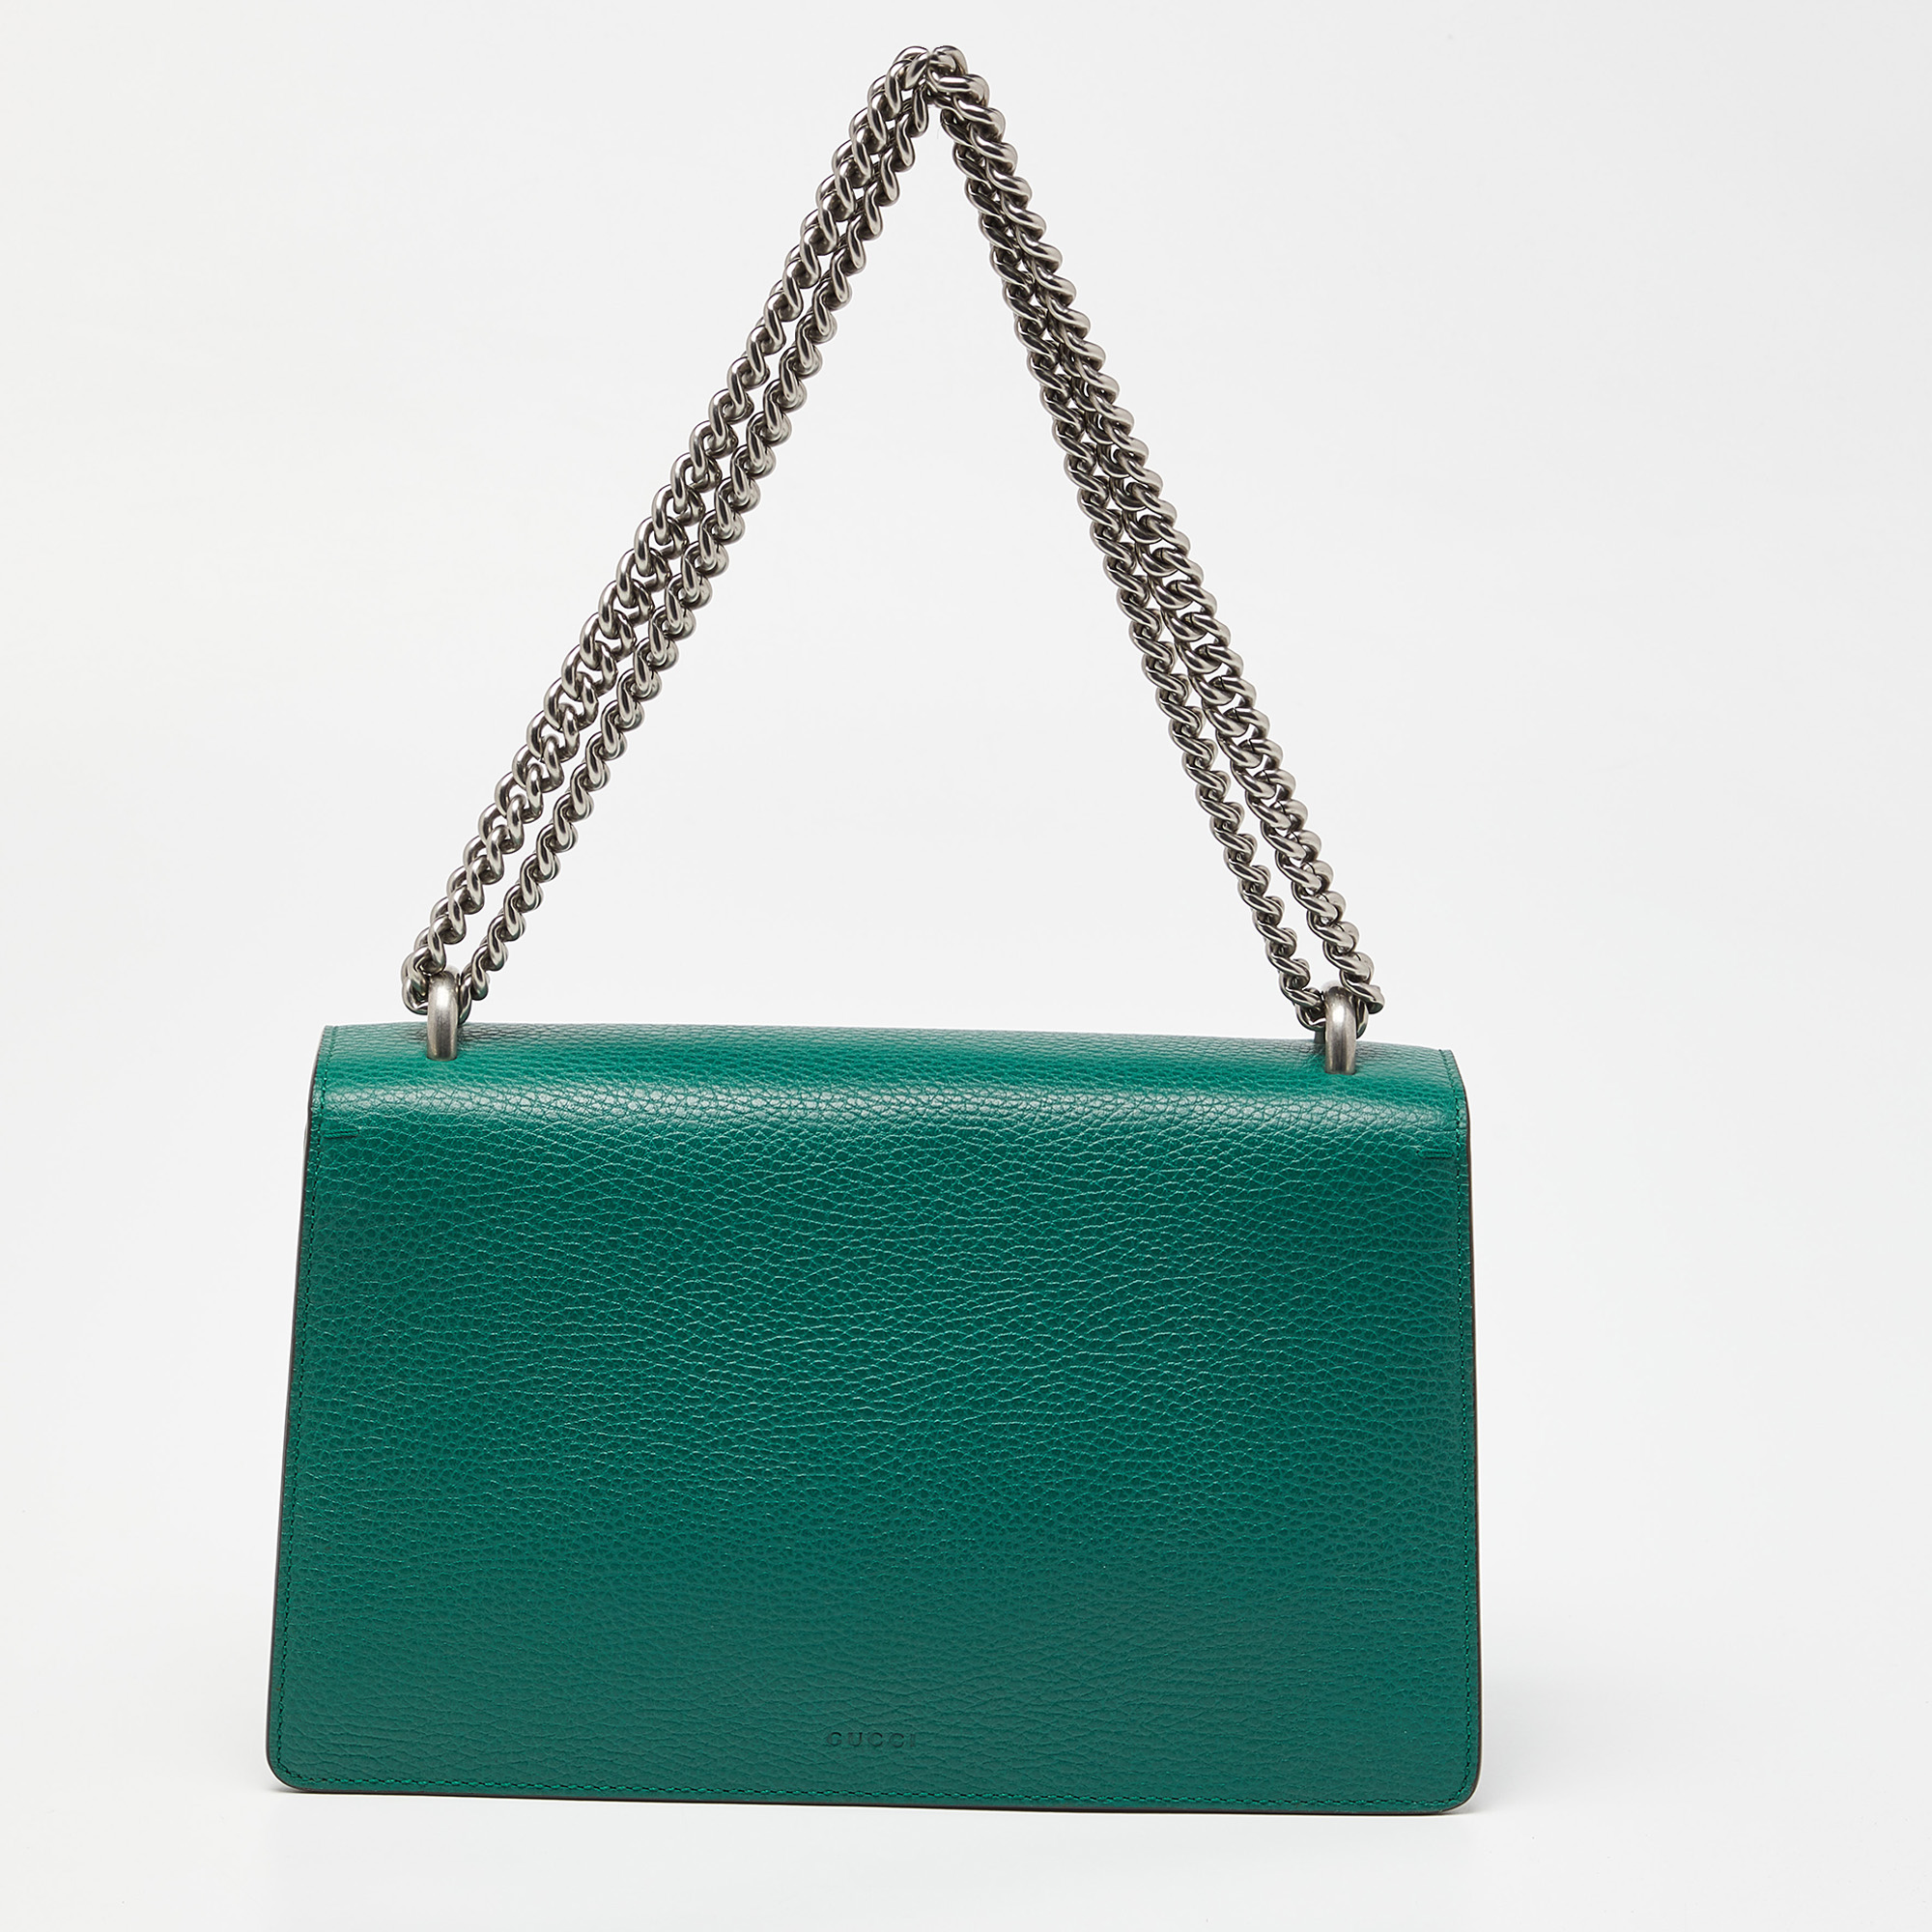 Gucci Green Leather Small Dionysus Crystals Shoulder Bag